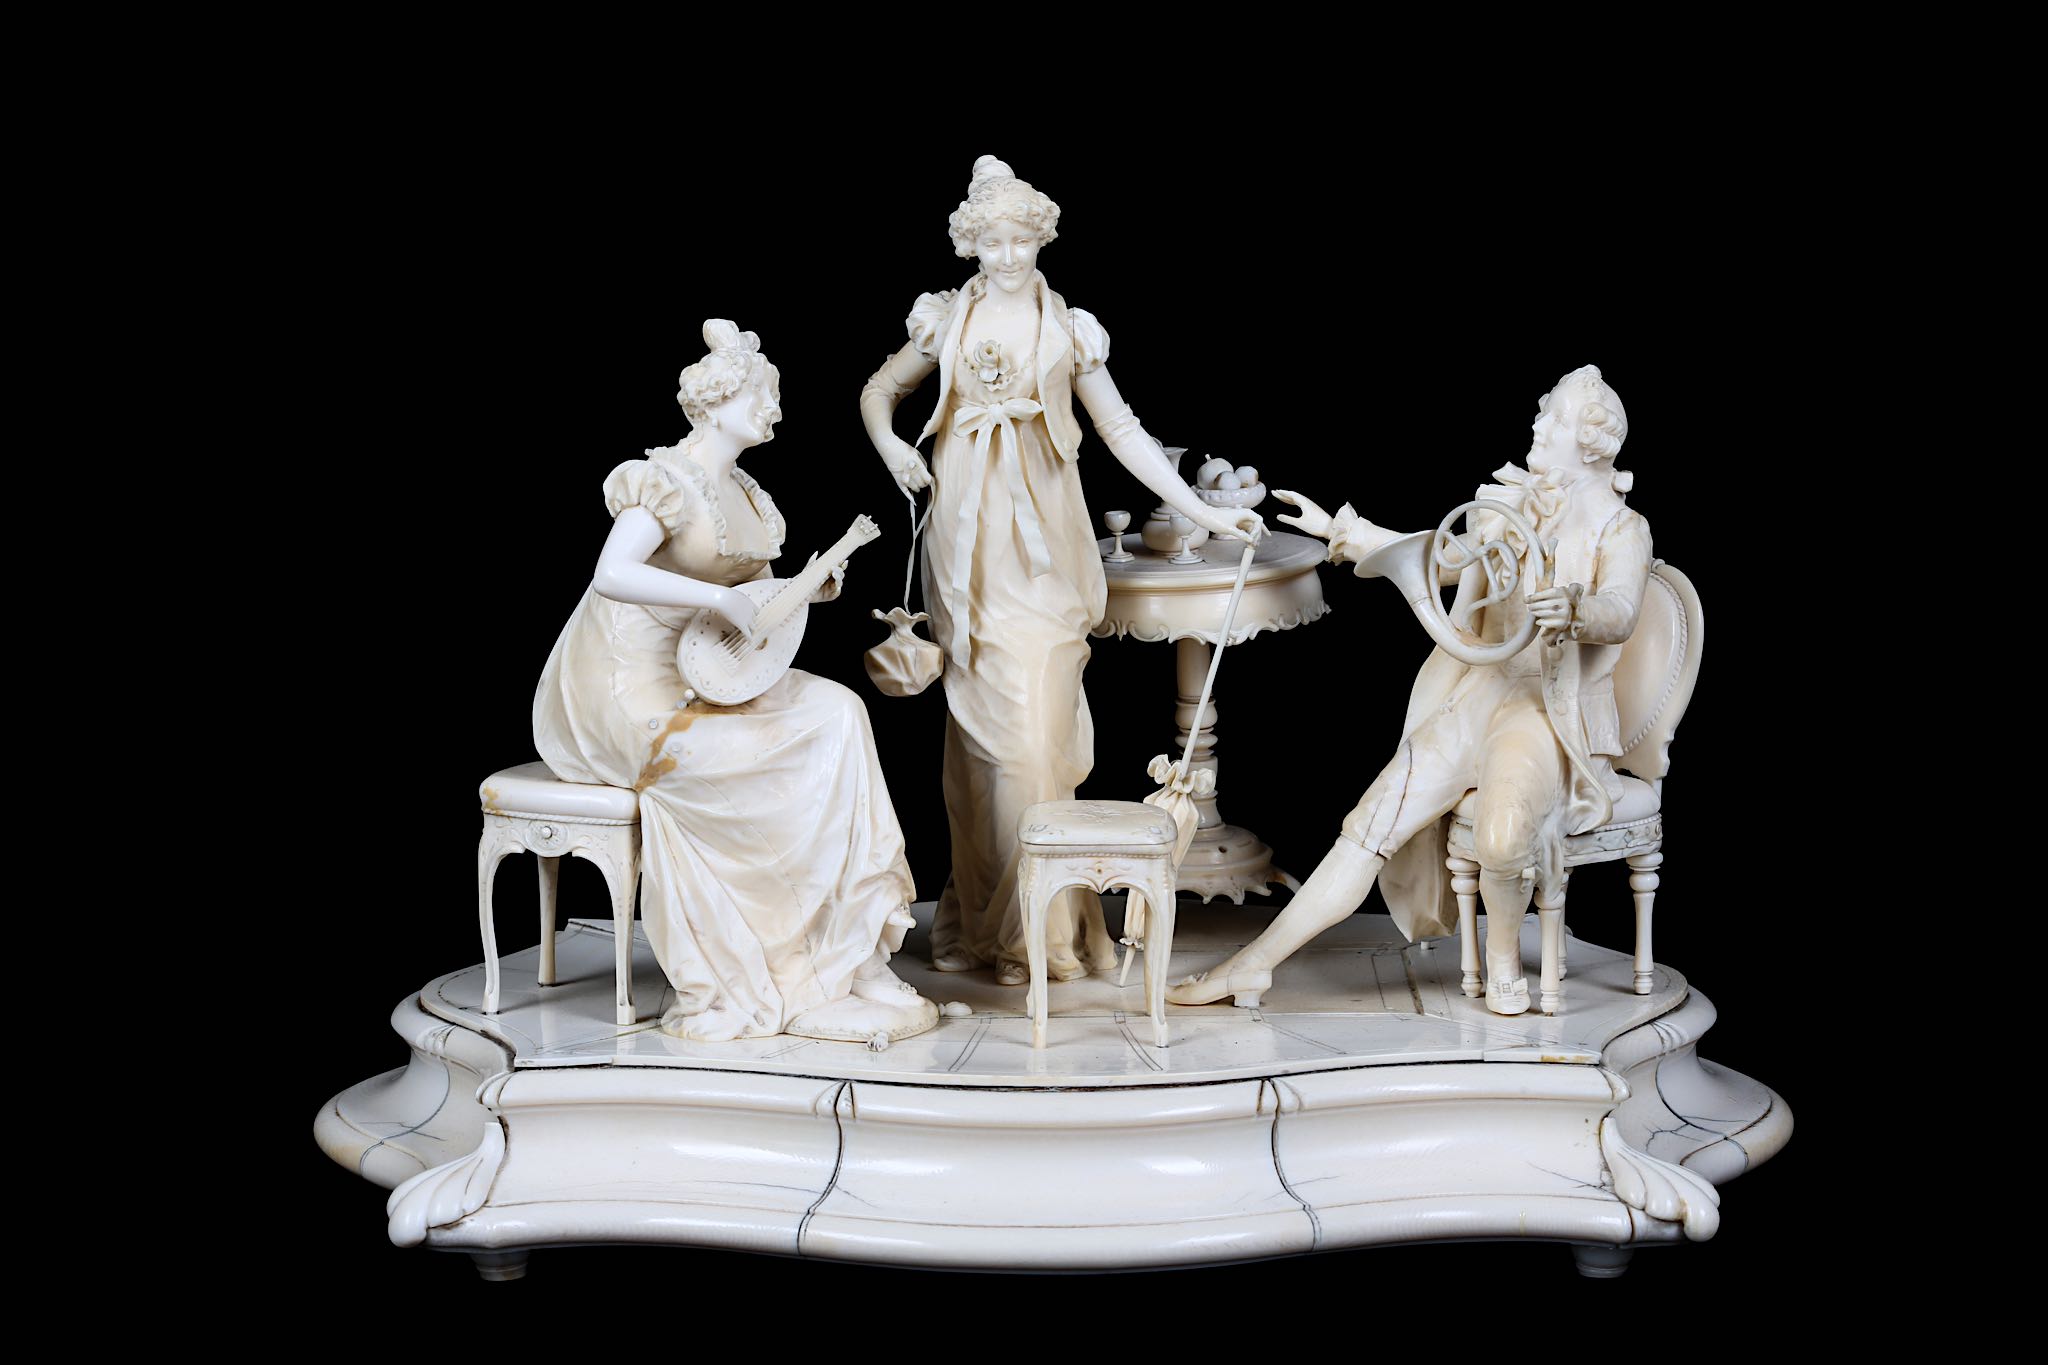 A LARGE LATE 19TH CENTURY GERMAN / AUSTRIAN CARVED IVORY FIGURAL GROUP OF AN INTERIOR SCENE